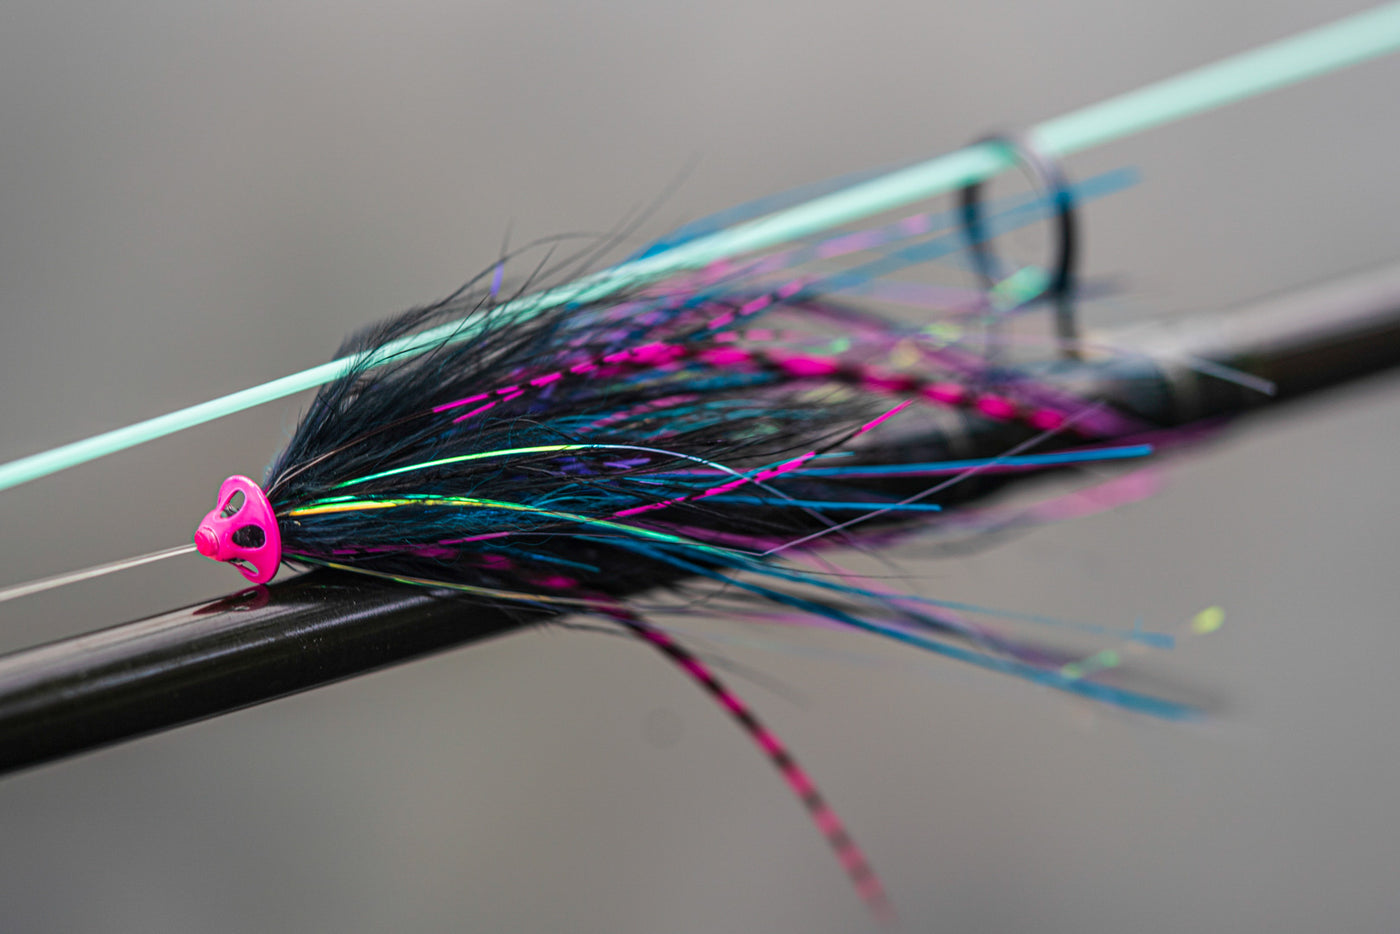 FLY TYING CLASSES - ONLINE OR IN-PERSON